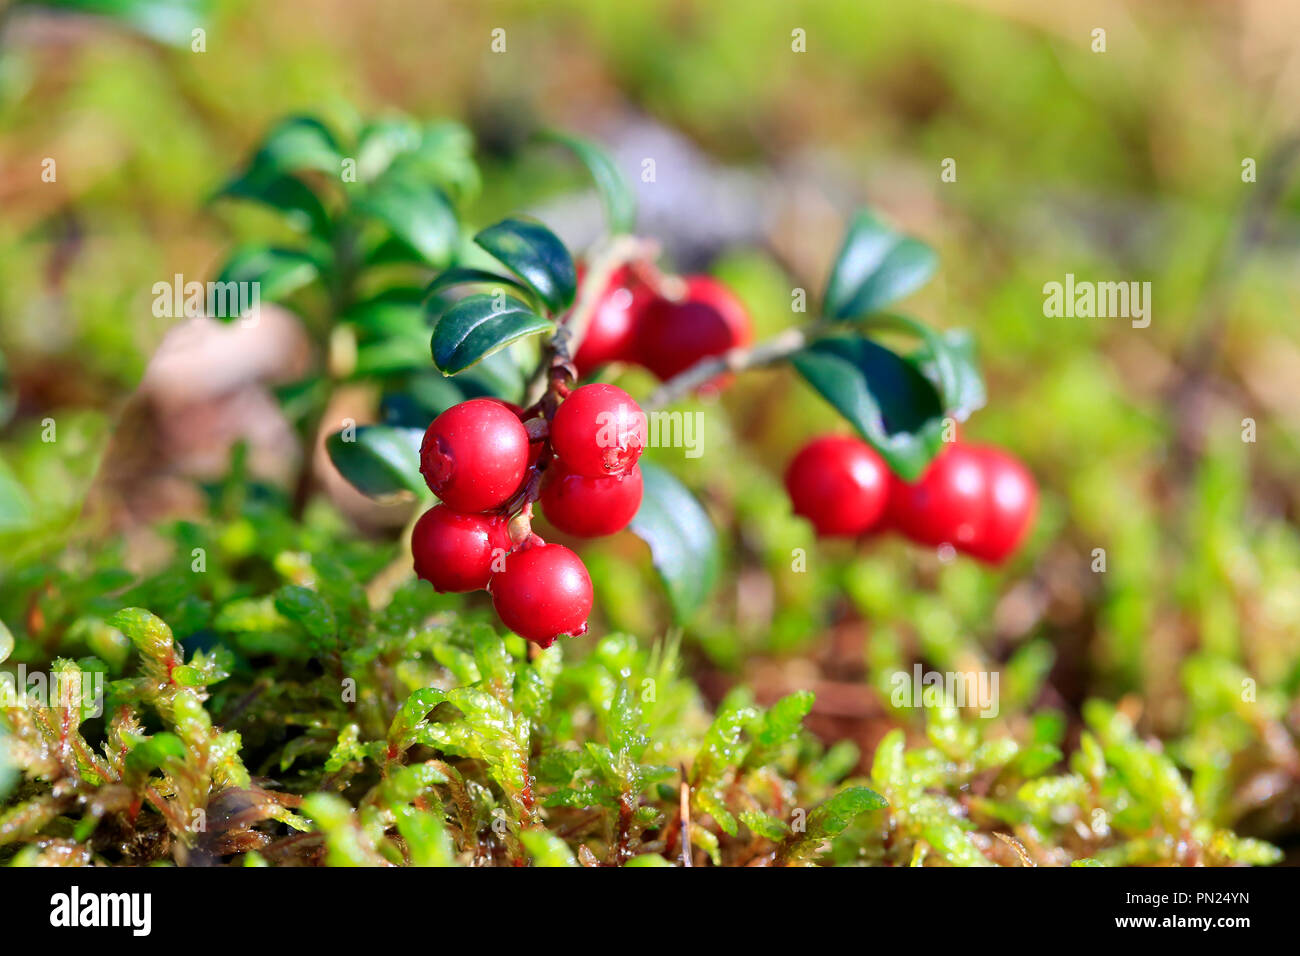 Close up of red Lingonberries or Cowberries, Vaccinium vitis-idaea, growing on forest floor with autumnal raindrops. Salo, Finland. Shallow dof. Stock Photo